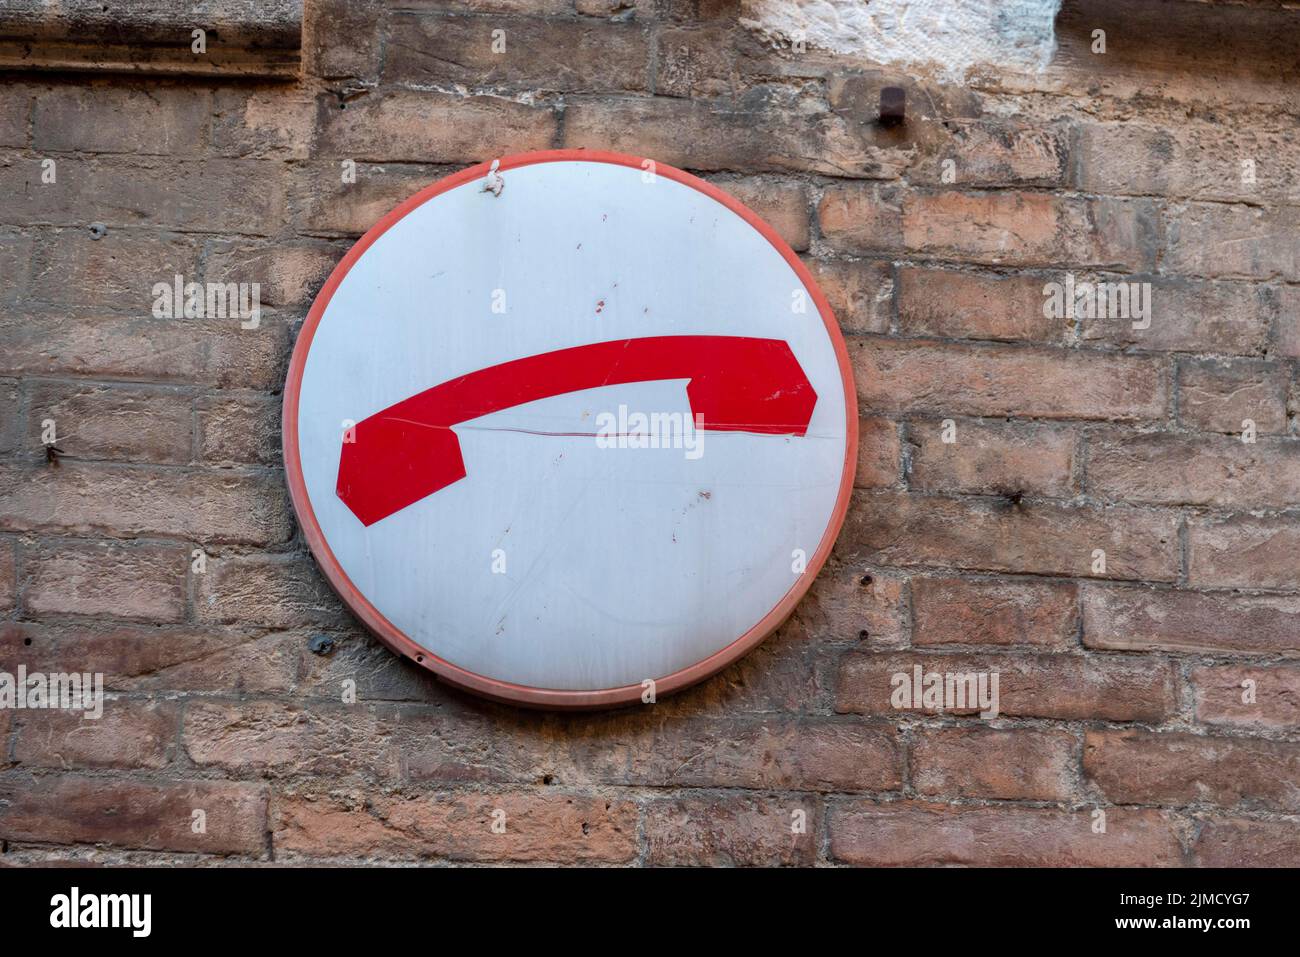 Red telephone receiver, sign on house wall, Siena, Tuscany, Italy Stock Photo